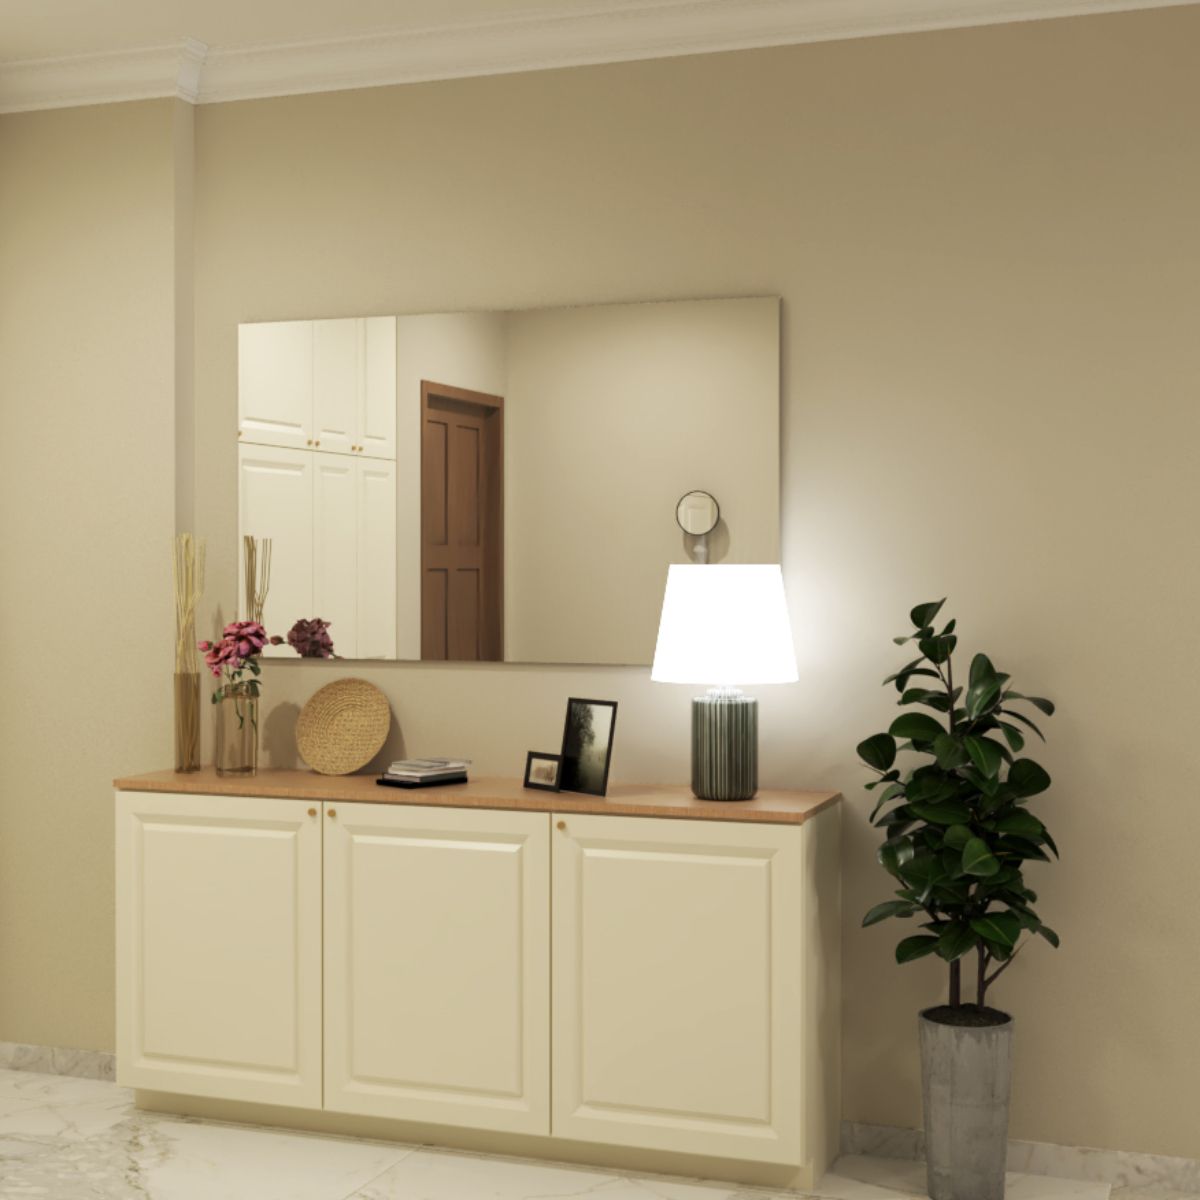 Pale Brown Wall Paint Design For Classic-Styled Interiors